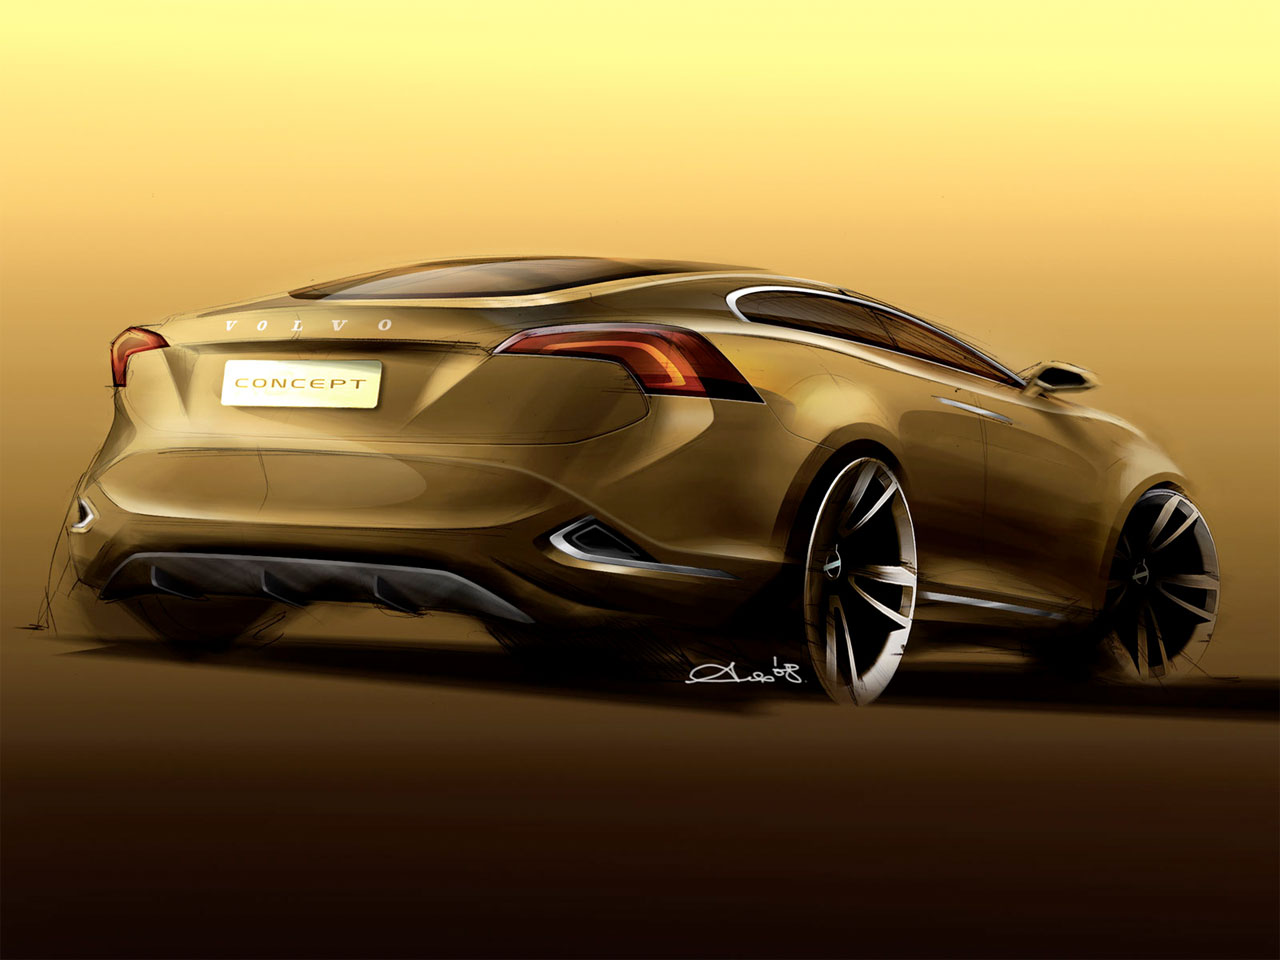 Volvo-S60 Concept From carbodydesign.com